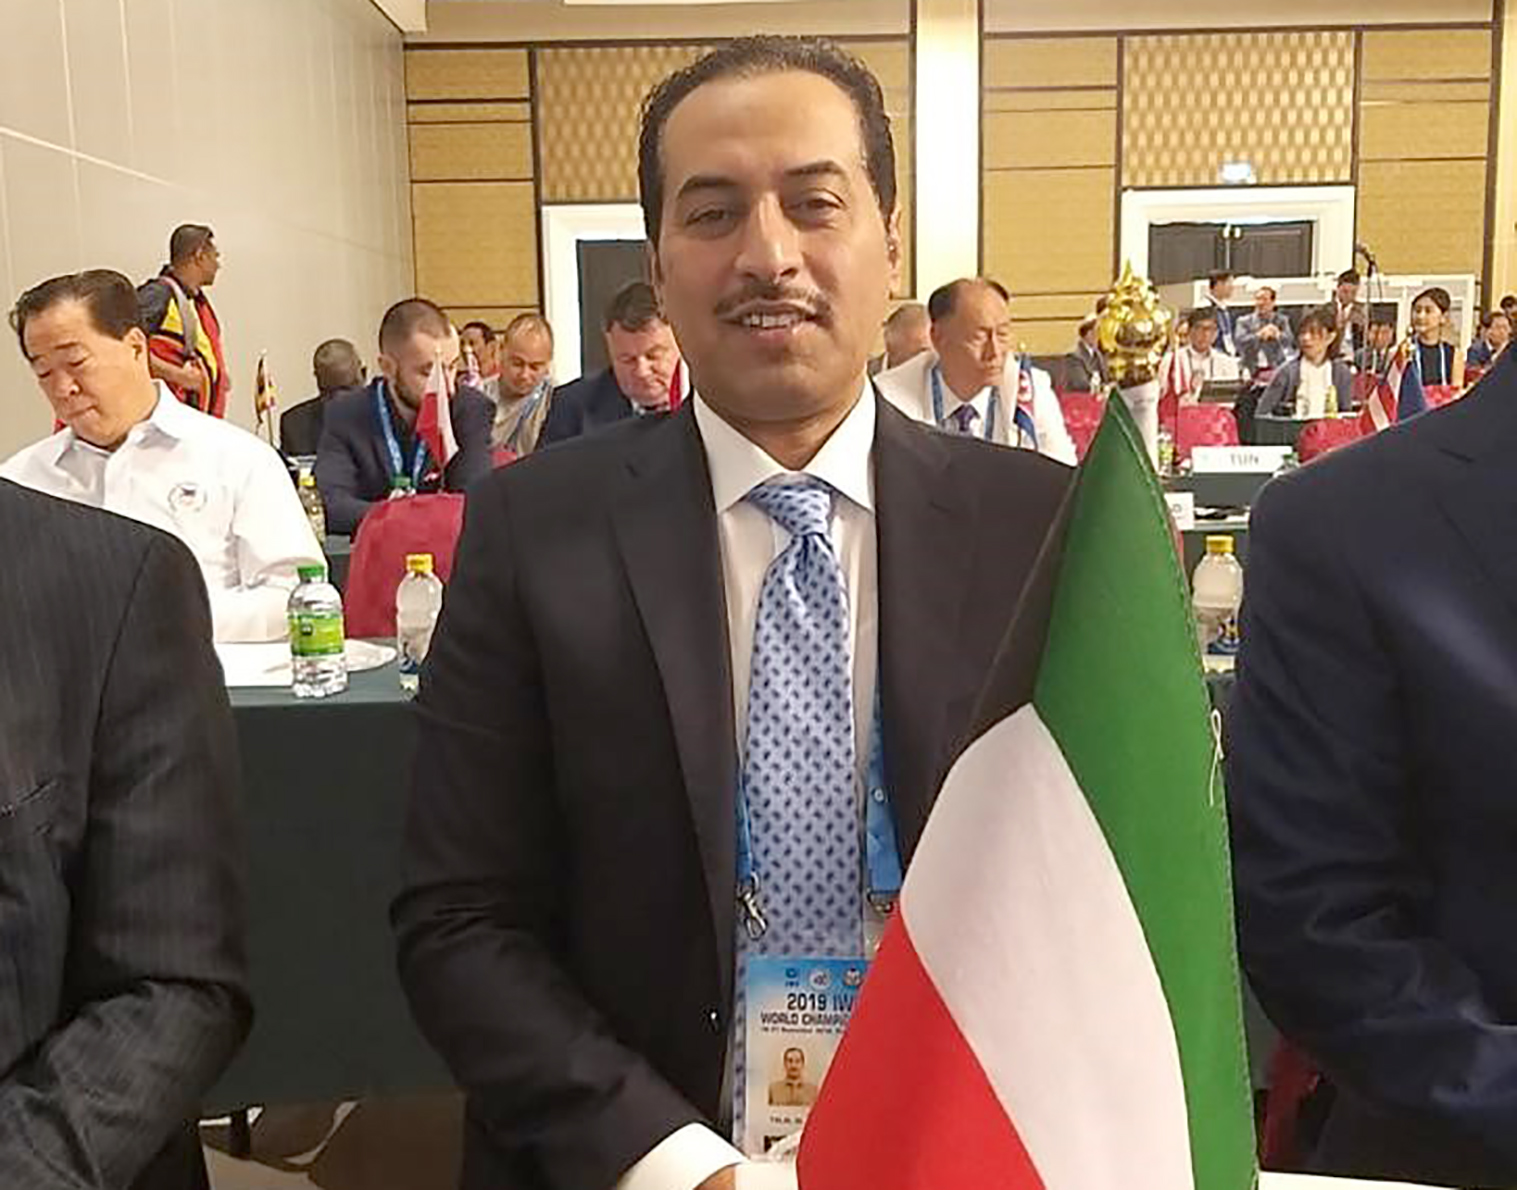 Kuwait Boxing and Weightlifting Federation chair, Talal Al-Jassar